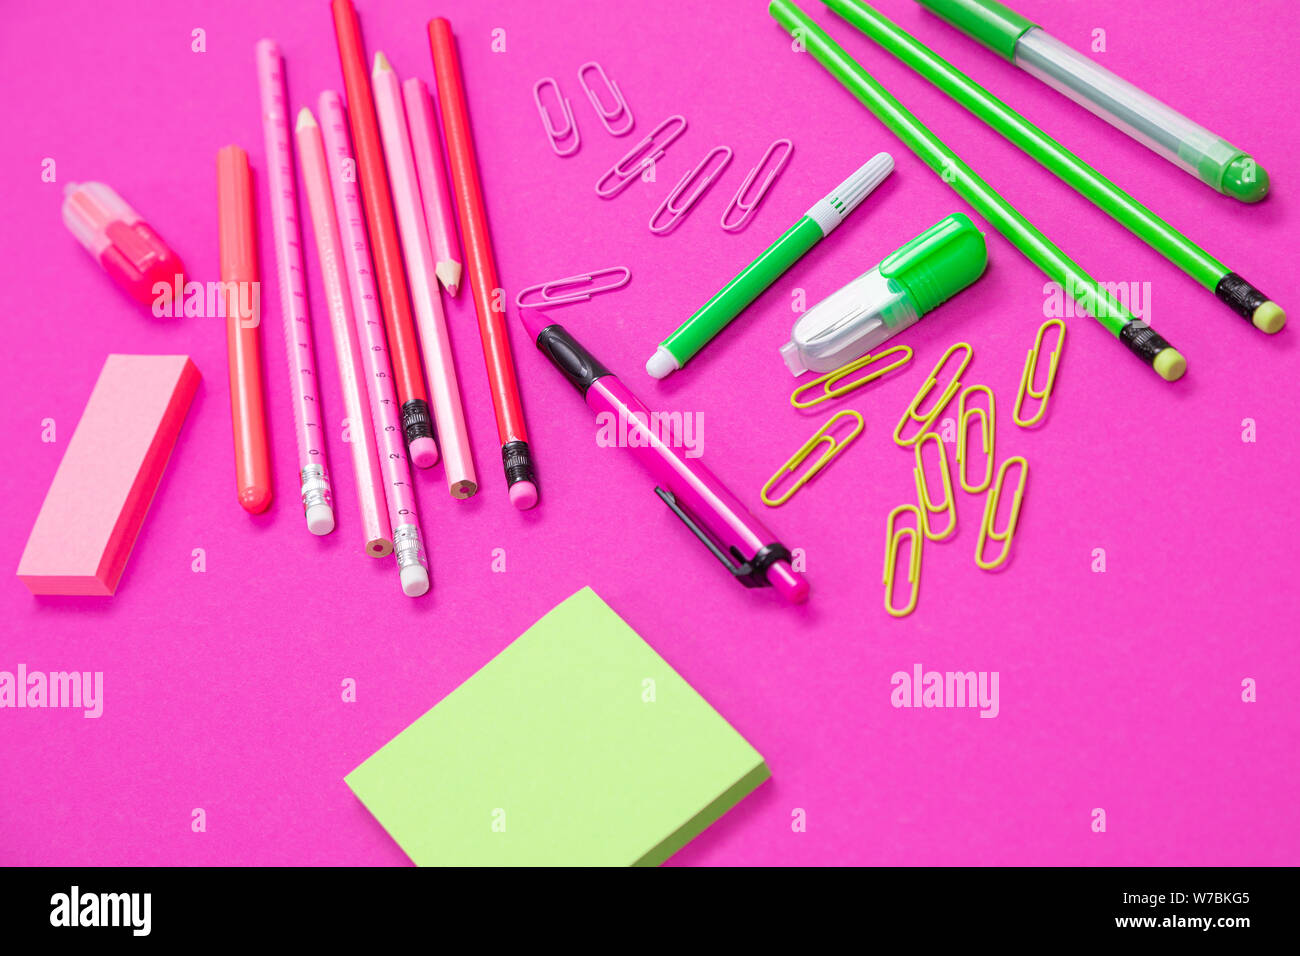 Group of pink and bright green office incidentals on pink background isolated Stock Photo